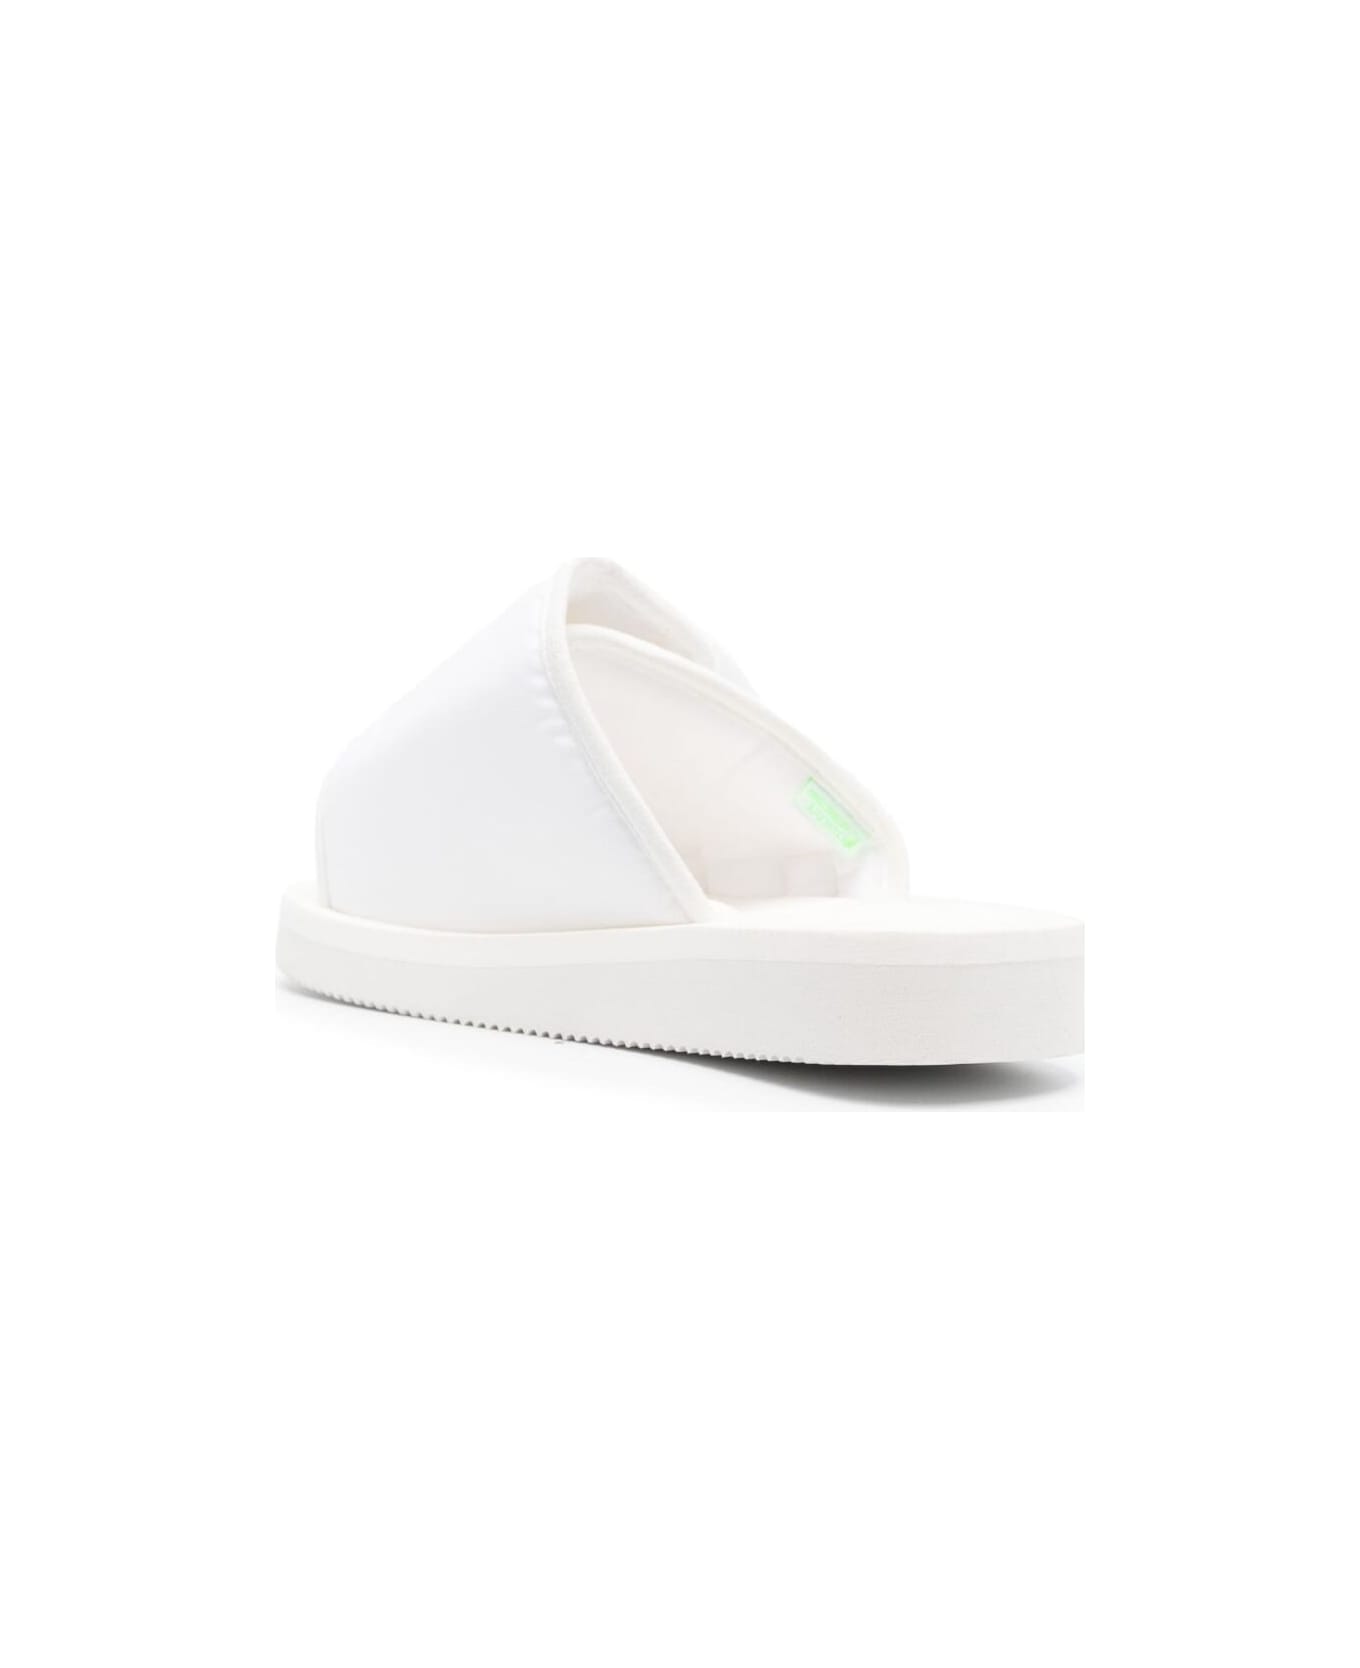 SUICOKE 'kaw-cab' White Sandals With Velcro Fastening In Nylon Woman Suicoke - White サンダル